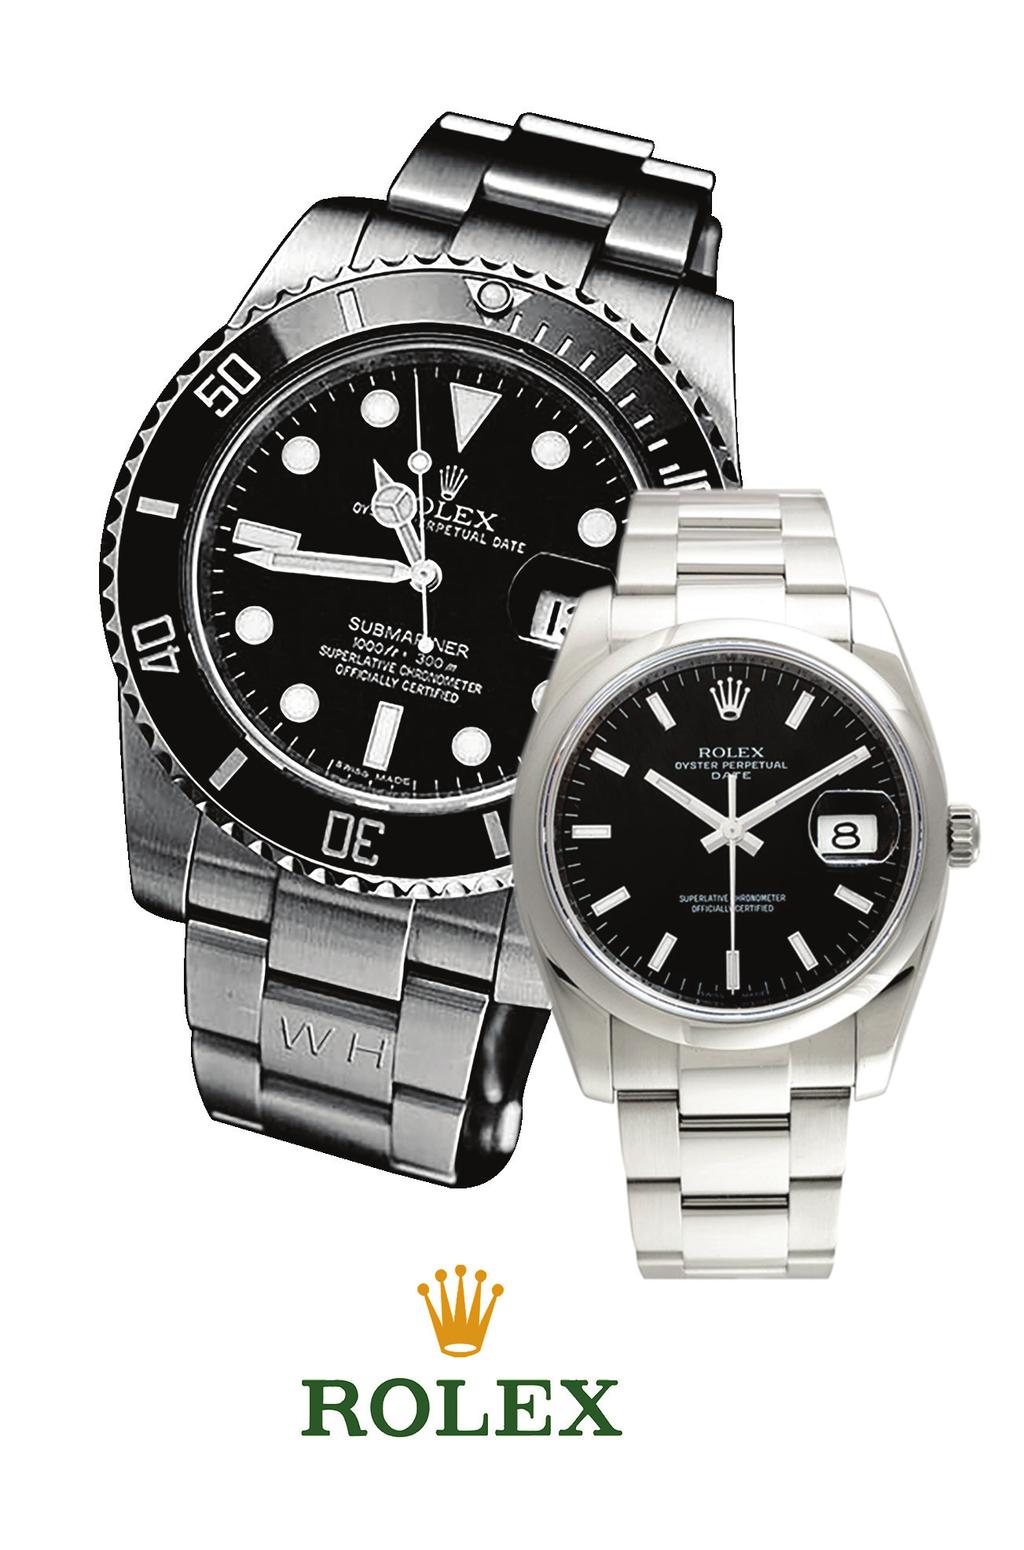 ROLEX WATCH INCENTIVE THE TIME IS RIGHT FOR SUCCESS Since 1905, the name Rolex has stood as a symbol of prestige, performance, and innovation.